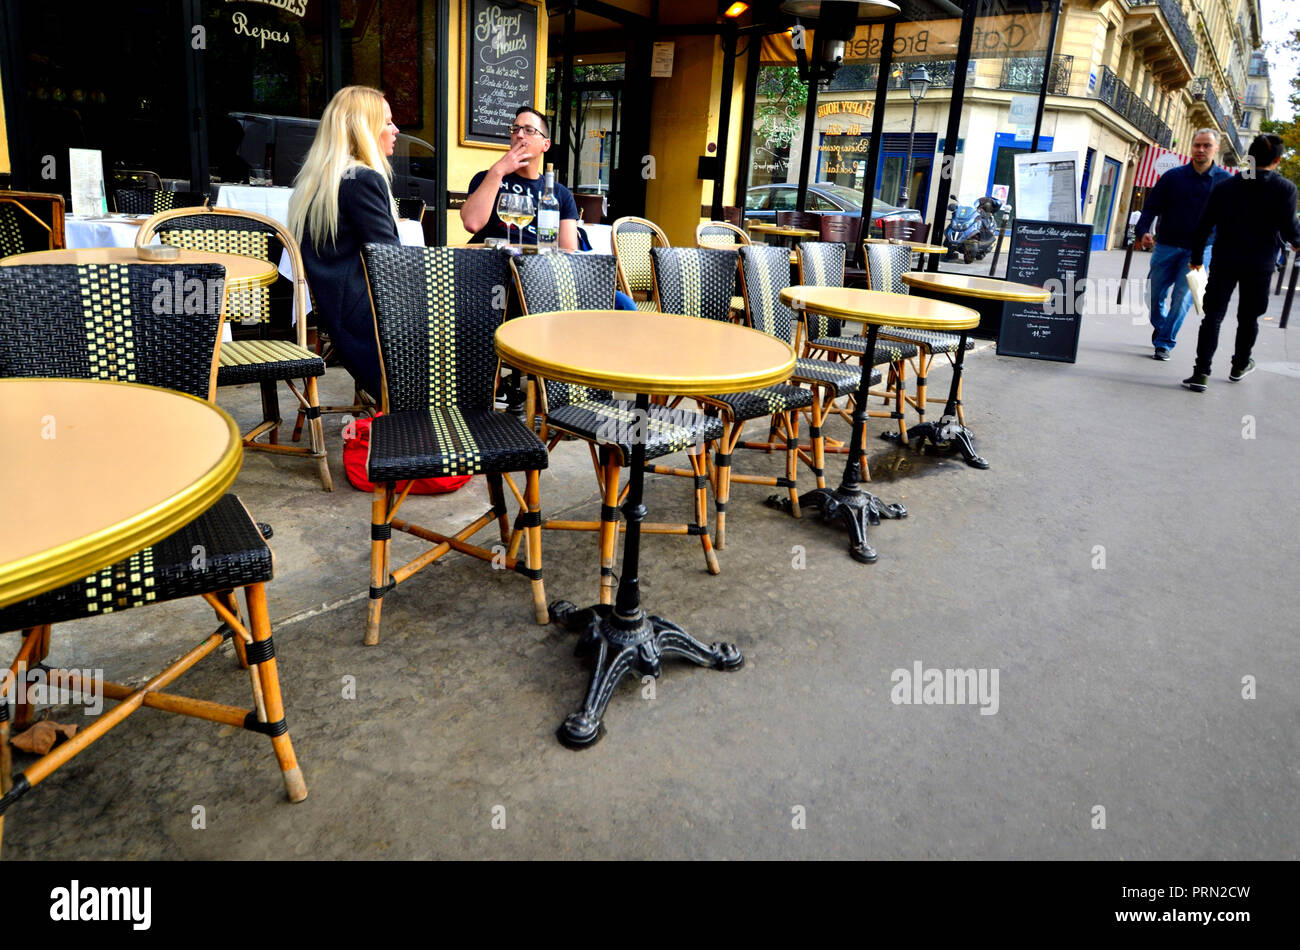 People drinking and smoking outside a cafe, Paris, France. Stock Photo